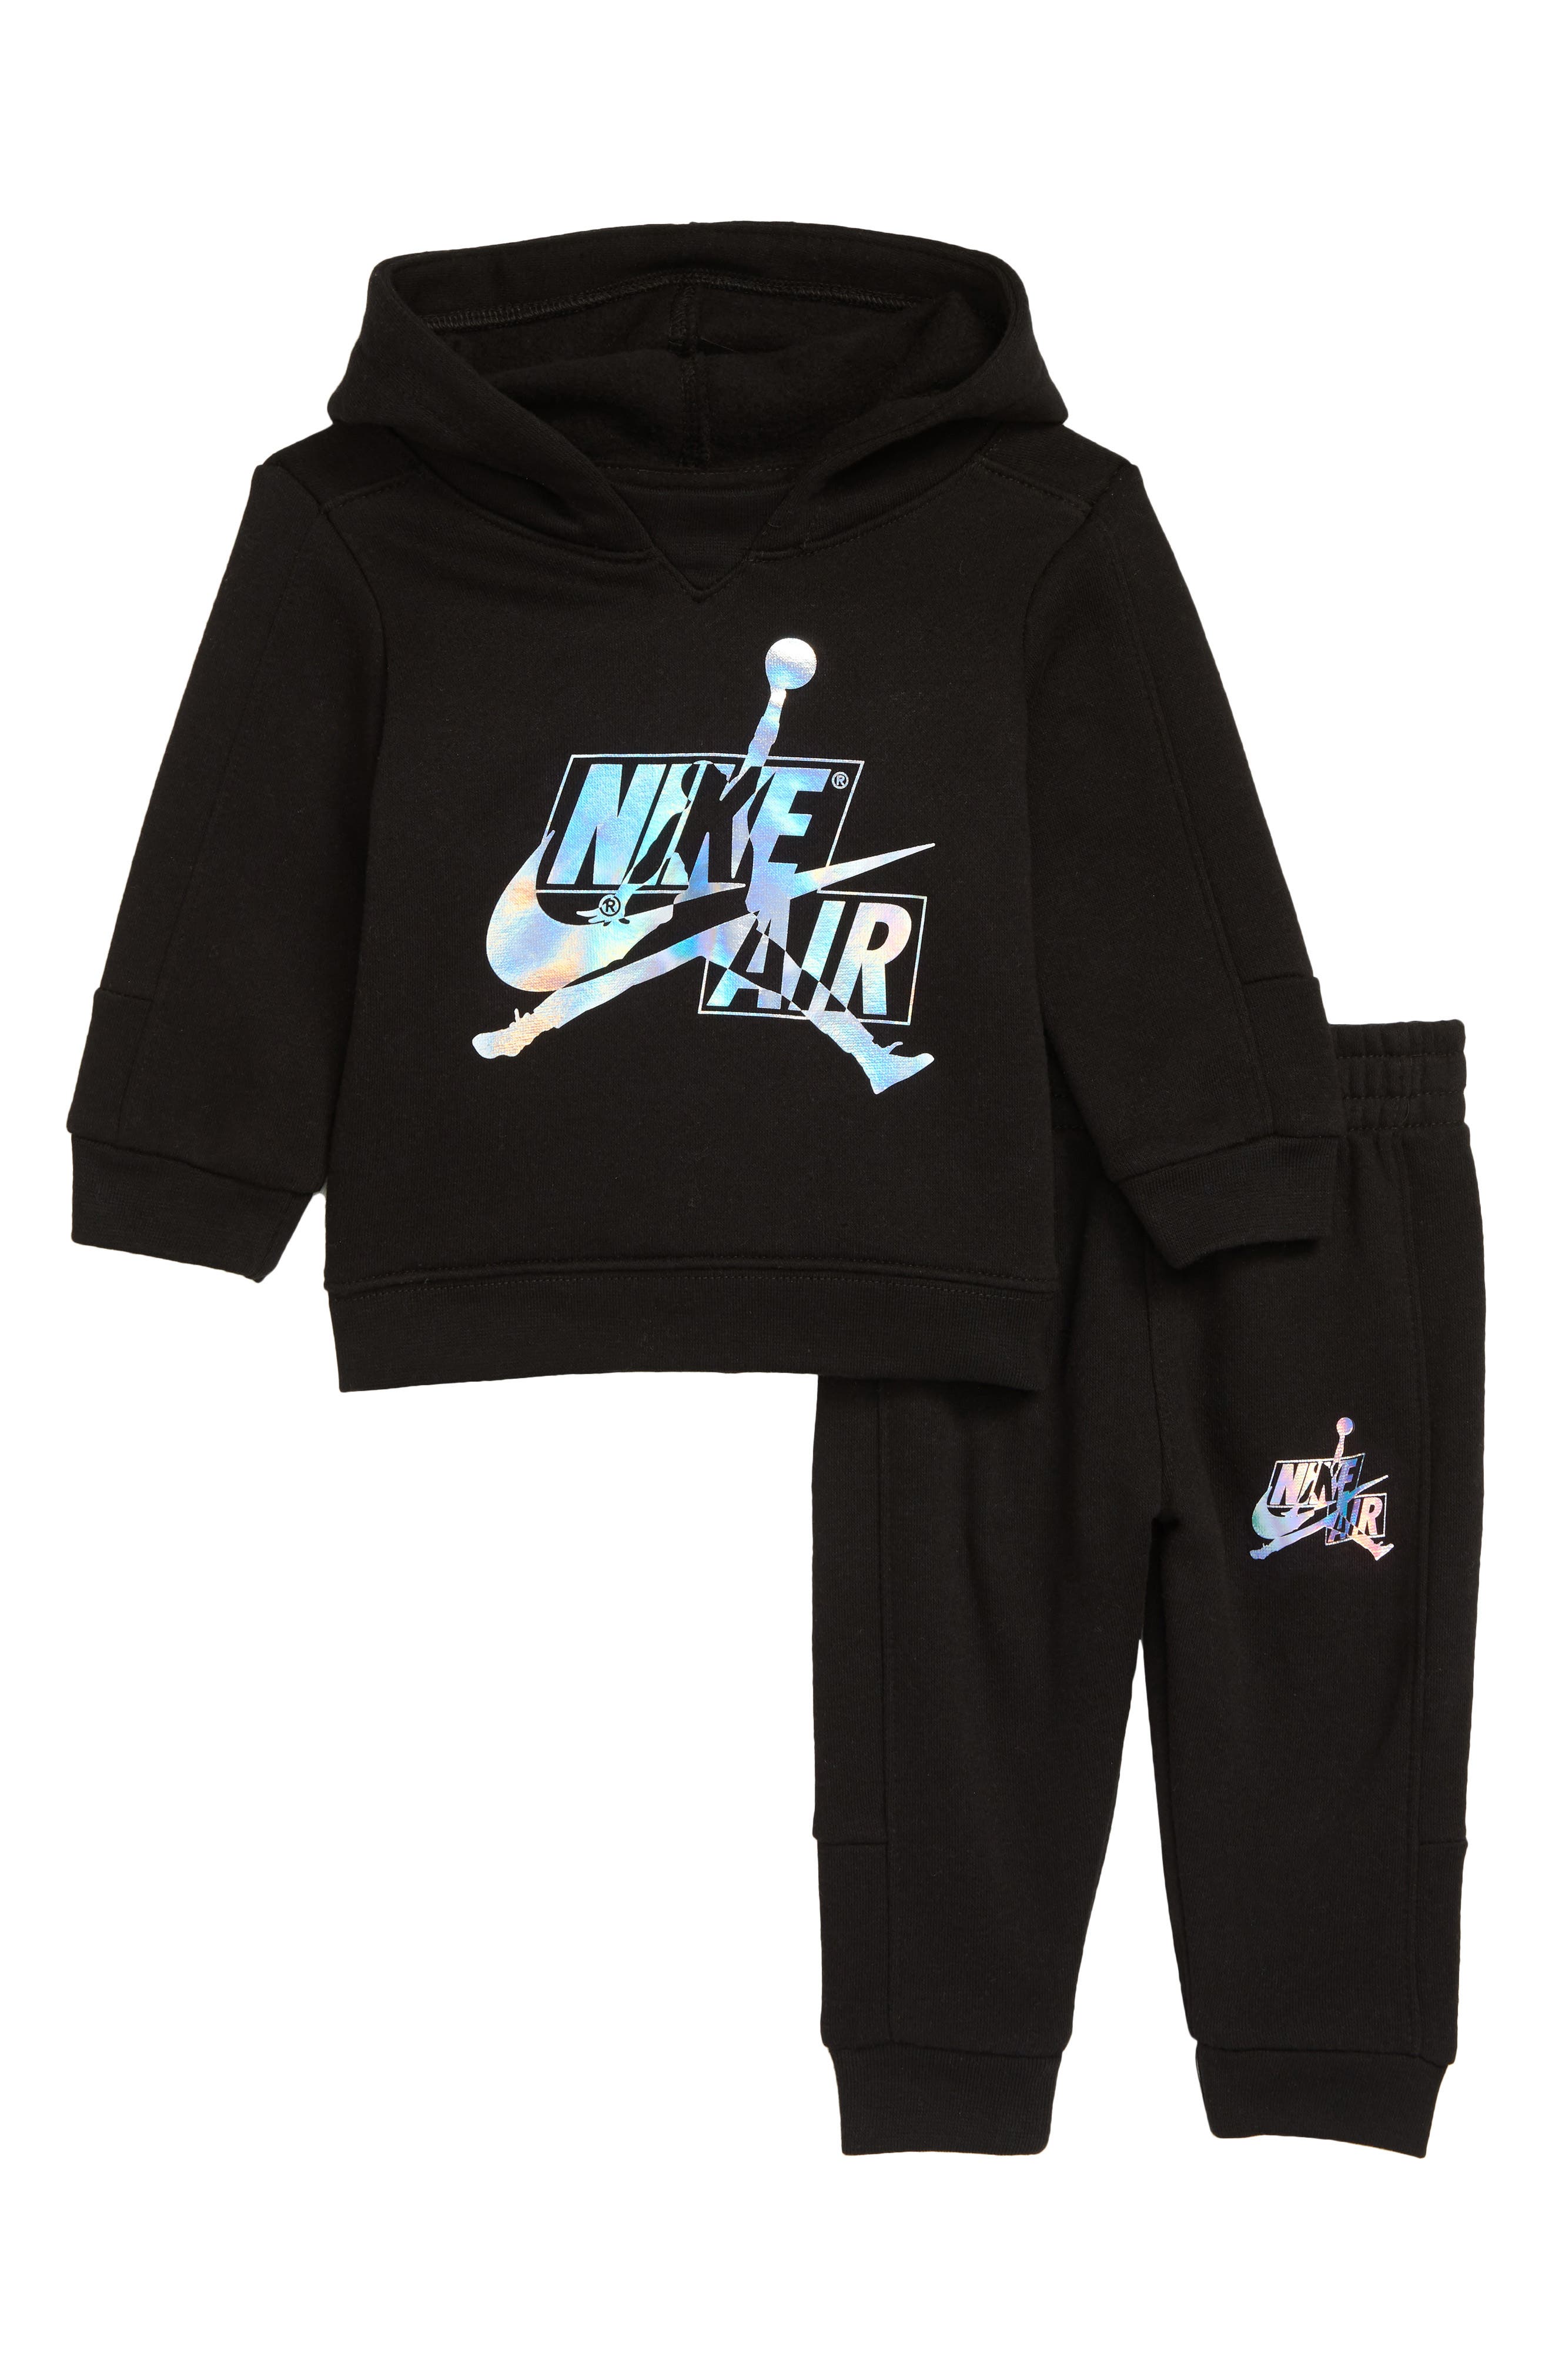 baby nike outfits boy